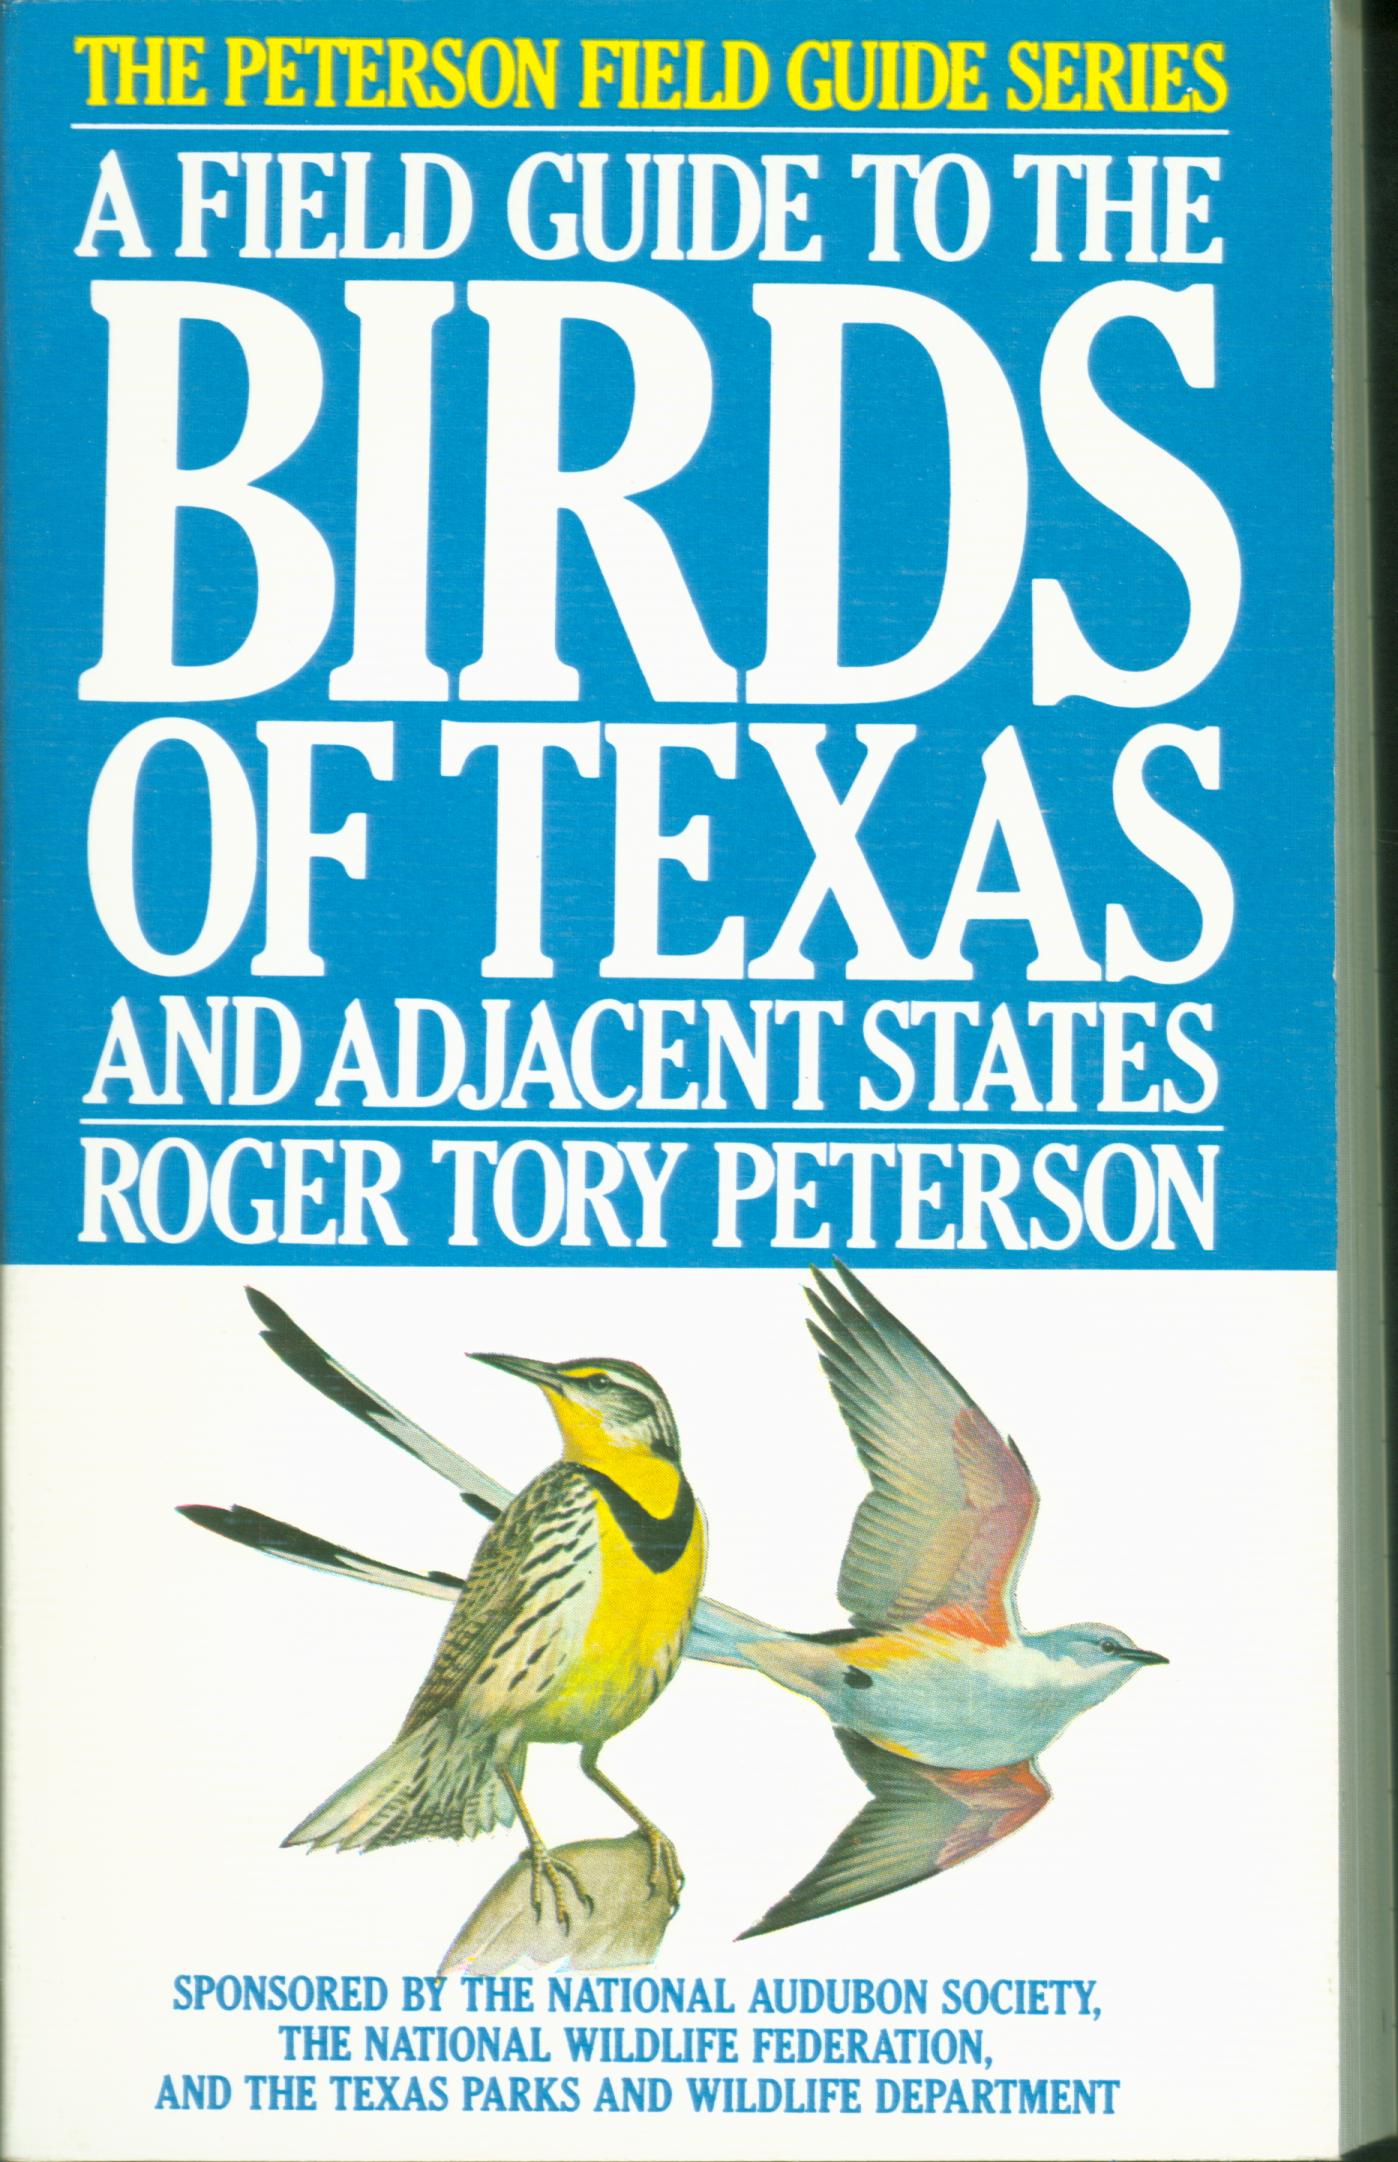 A FIELD GUIDE TO BIRDS OF TEXAS AND ADJACENT STATES. 